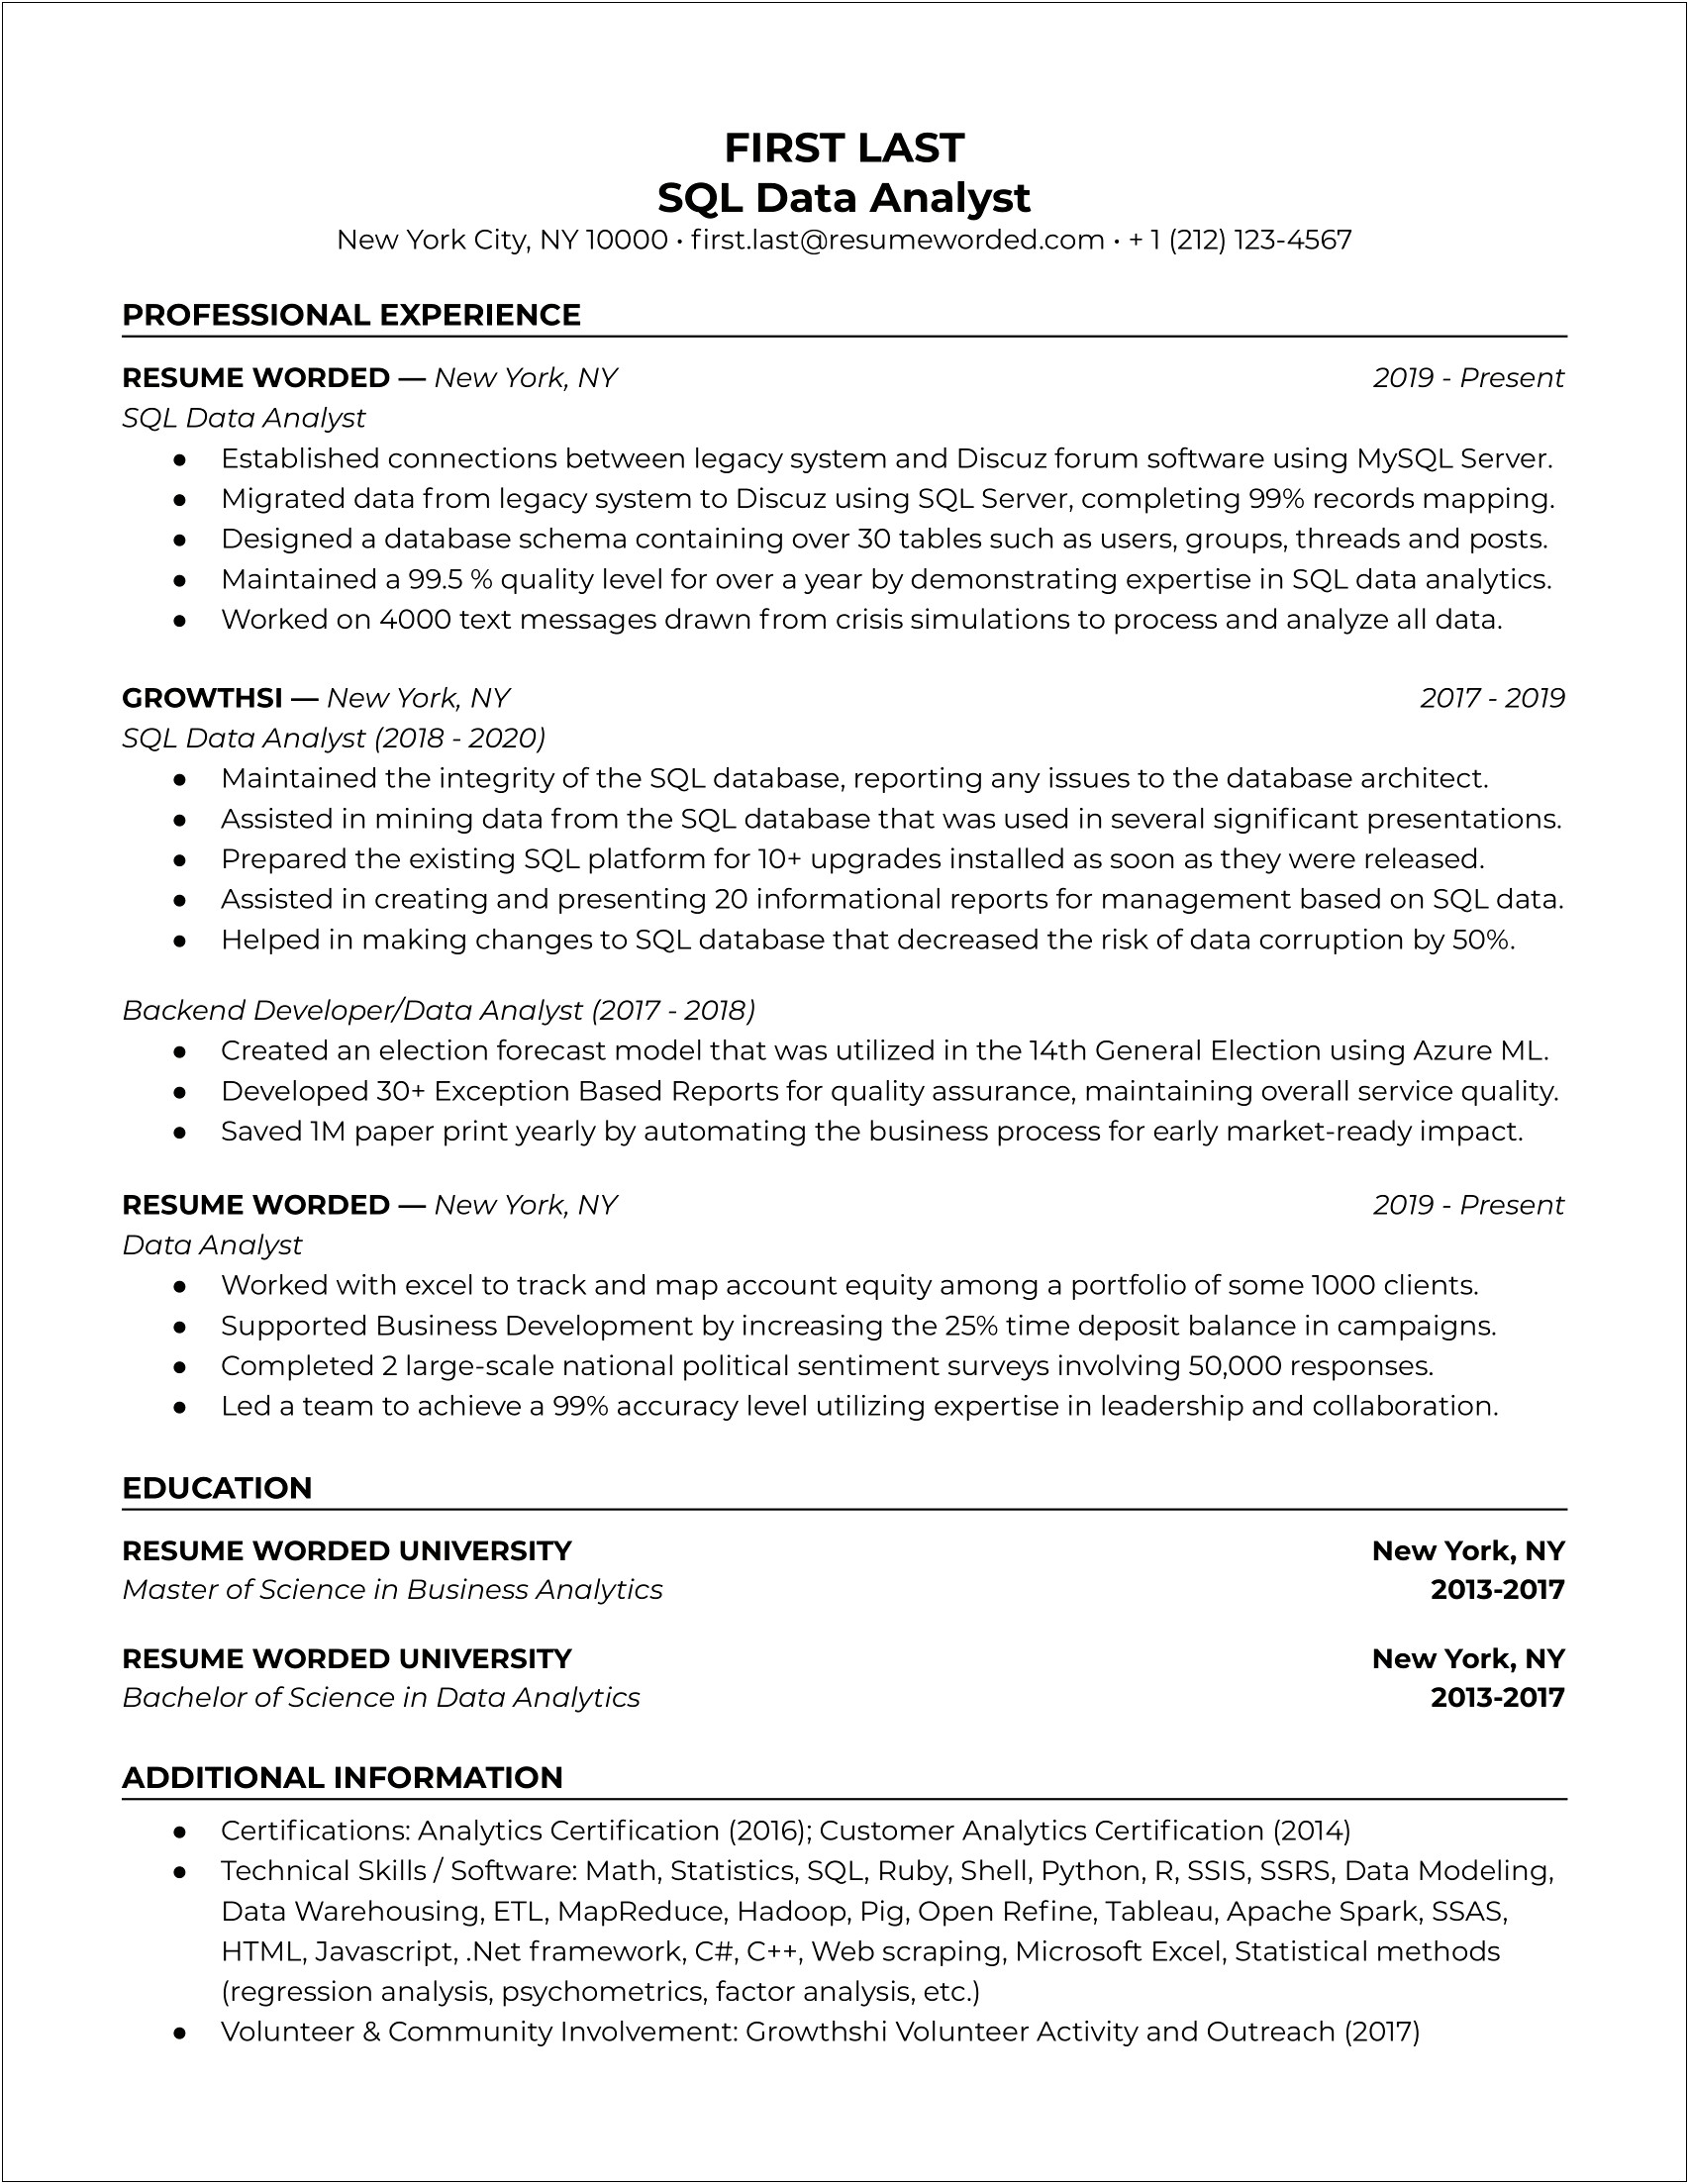 Website Where You Can Print A Sample Resume